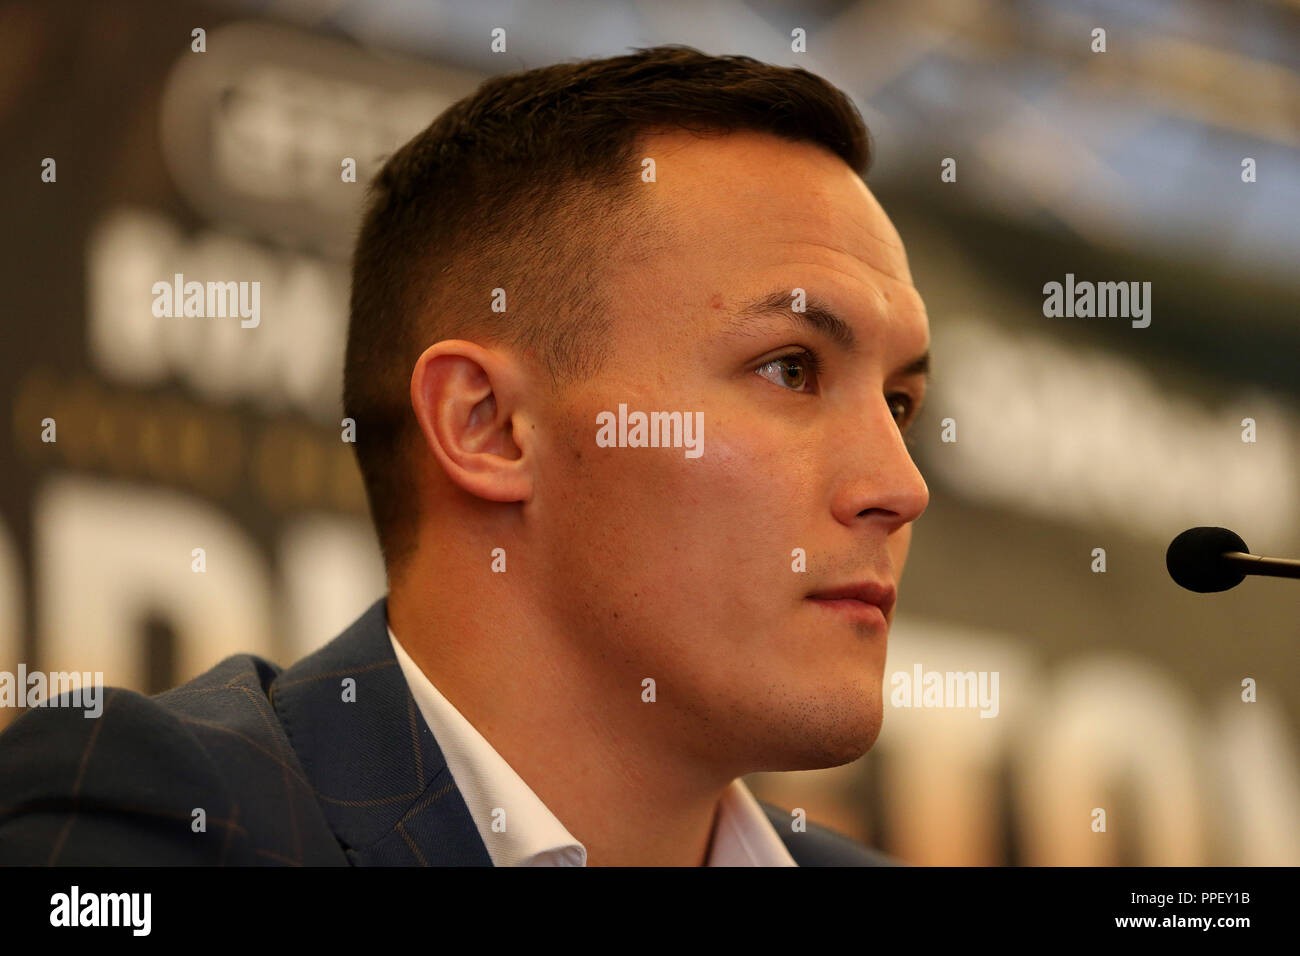 Josh Warrington during the press conference at Grosvenor House, London. PRESS ASSOCIATION Photo. Picture date: Tuesday September 25, 2018. See PA story BOXING London. Photo credit should read: Steven Paston/PA Wire. Stock Photo